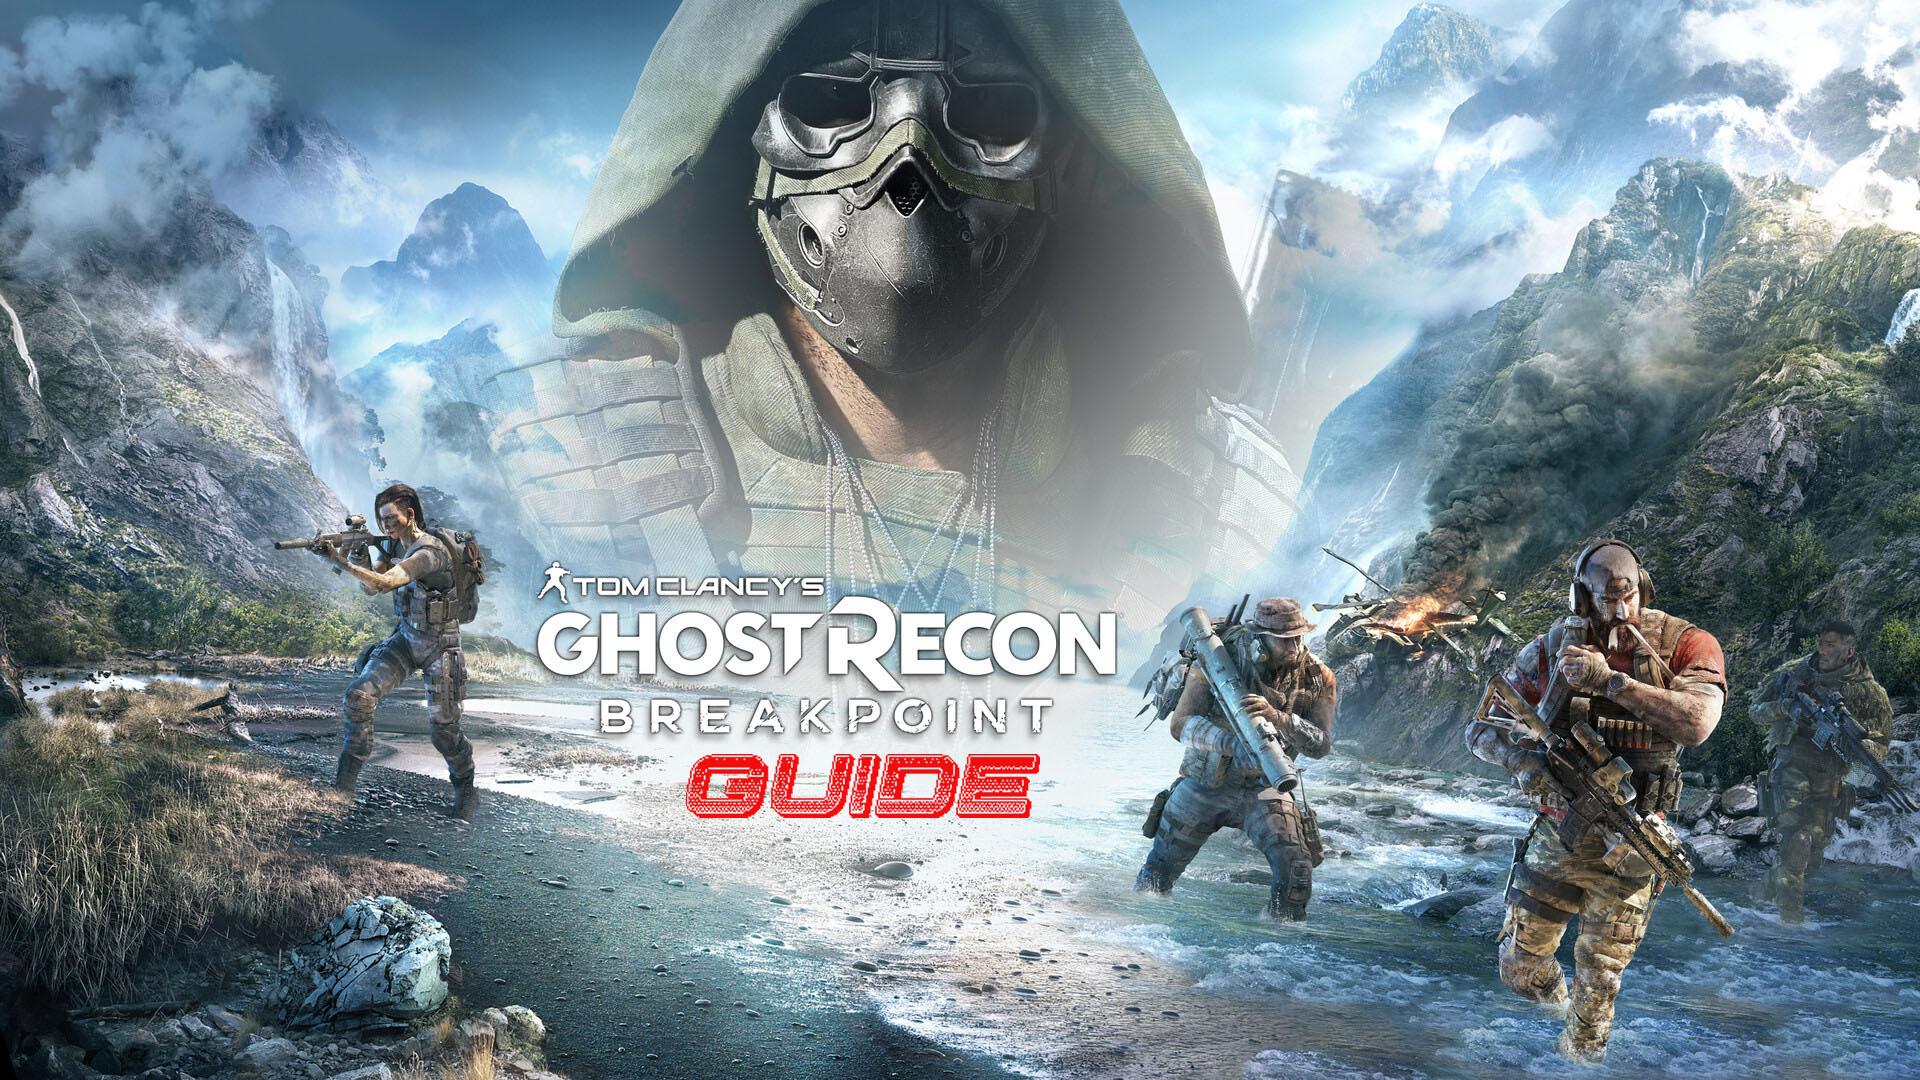 Overlord 3 1 ghost recon breakpoint. Tom Clancy's Ghost Recon Break point 2019. Tom Clancy's Ghost Recon breakpoint 2. Ghost Recon breakpoint 2019. Ghost Recon breakpoint ps4.